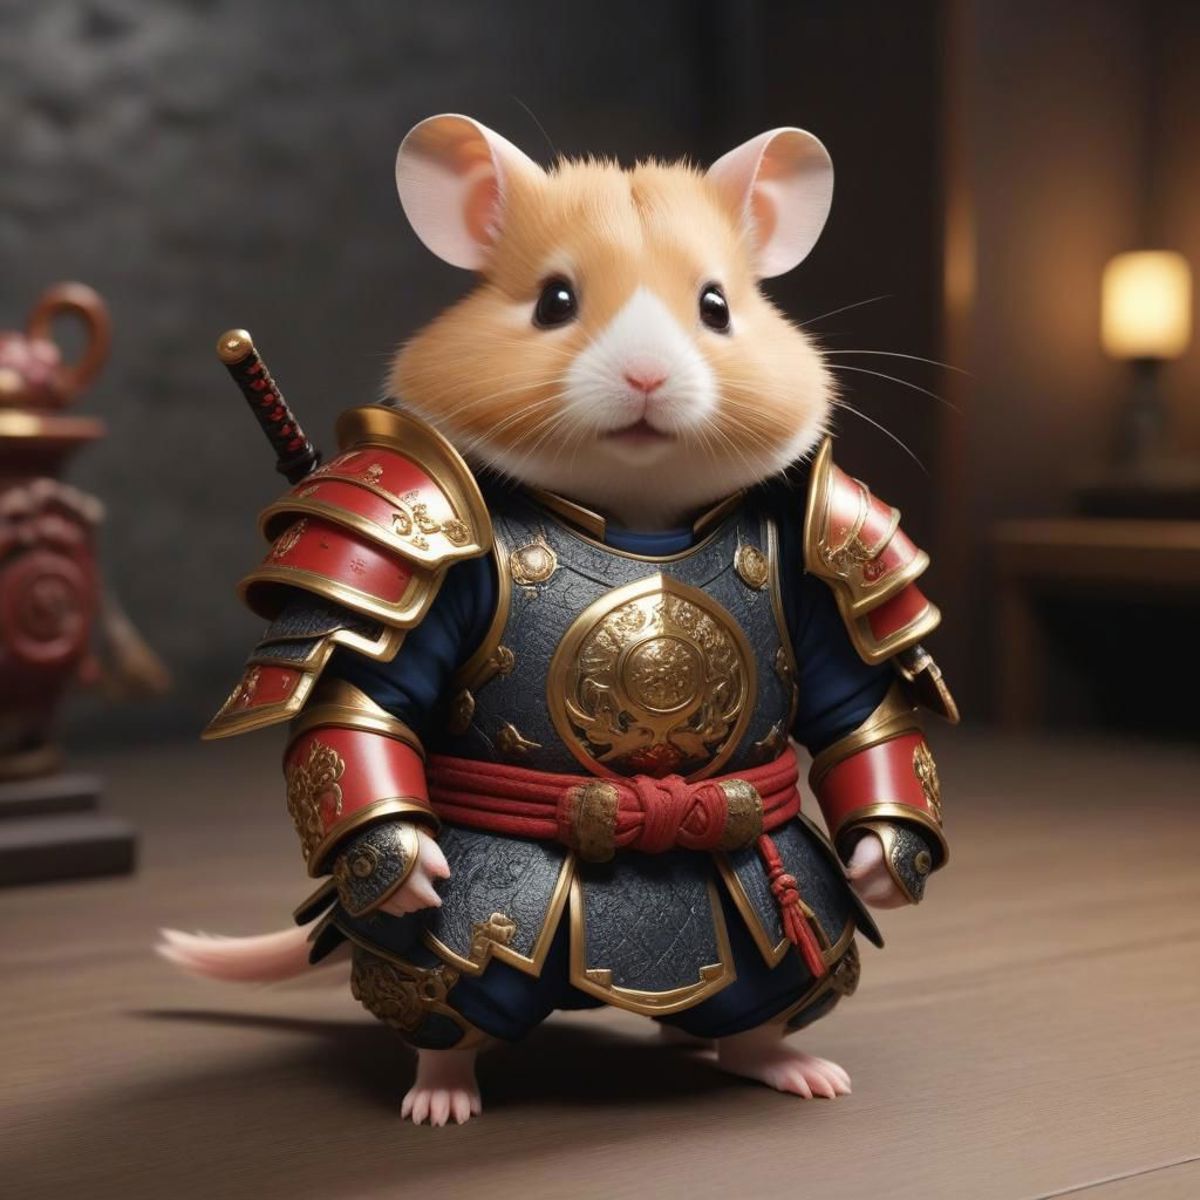 A tiny hamster wearing a knight's armor or armor costume.